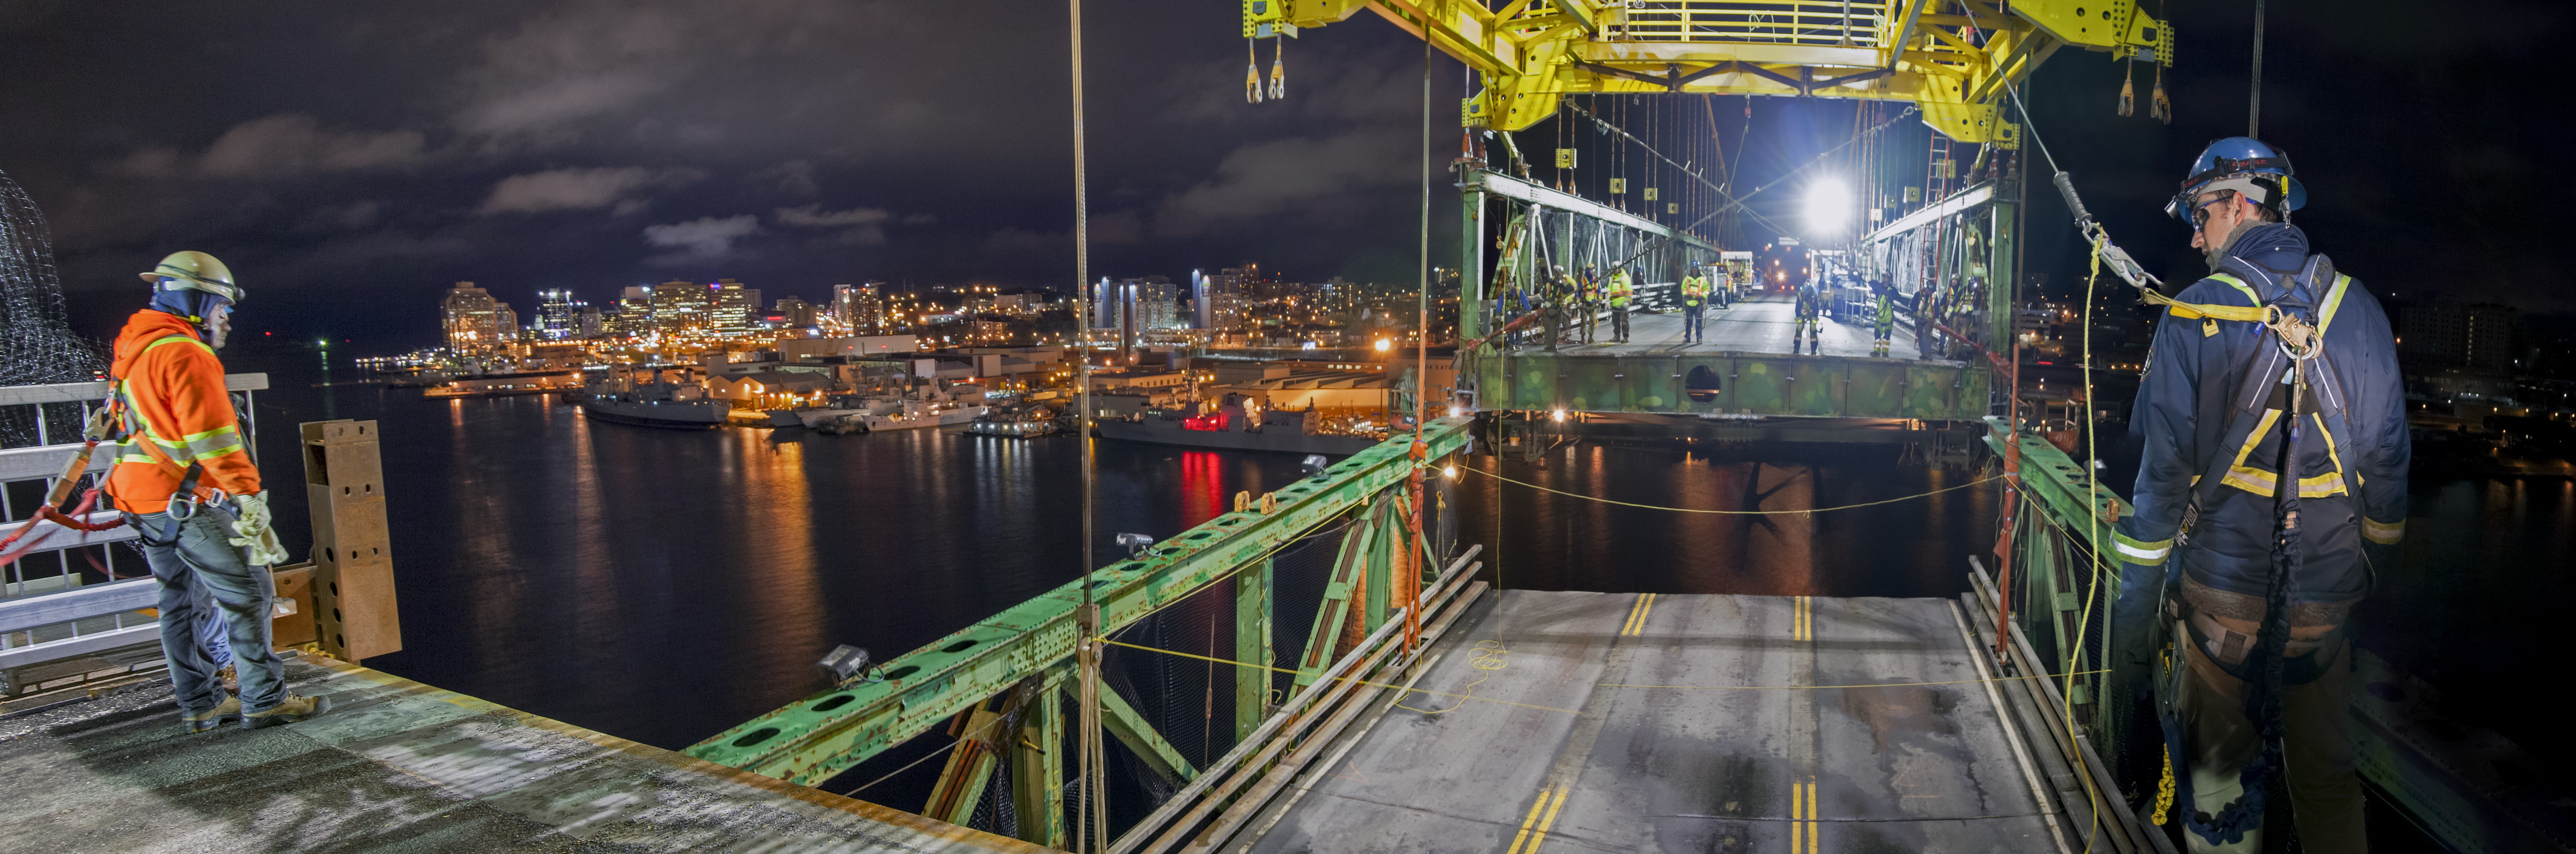 Workers watch a deck segment be raised into place on the Macdonald Bridge during the Big Lift.